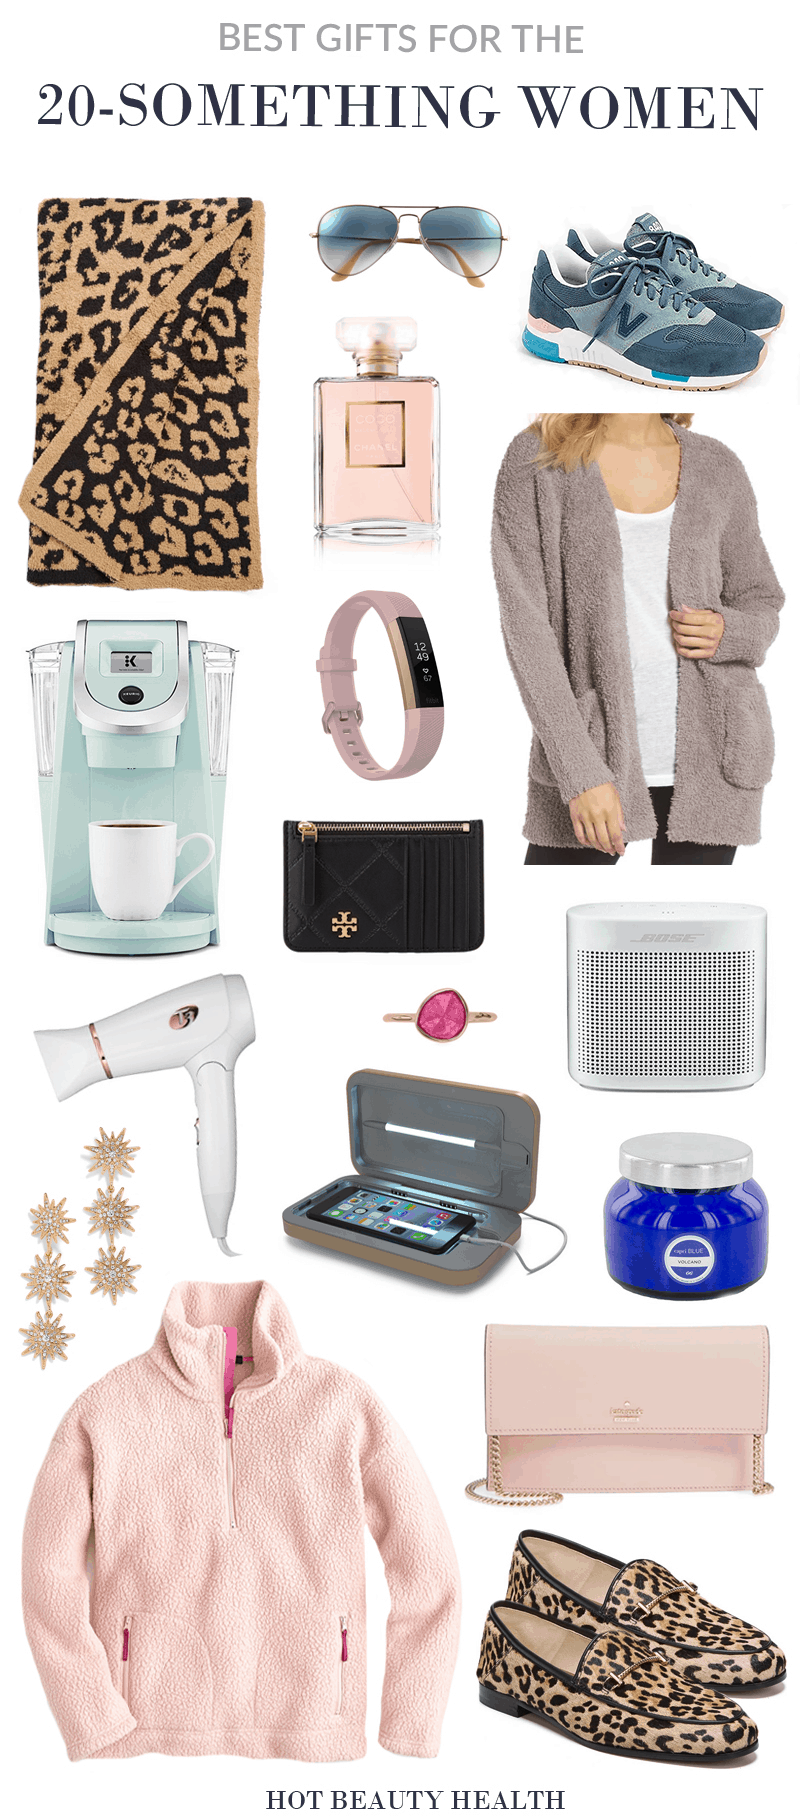 The Best Gifts For Women In Their 20s That They'll Love